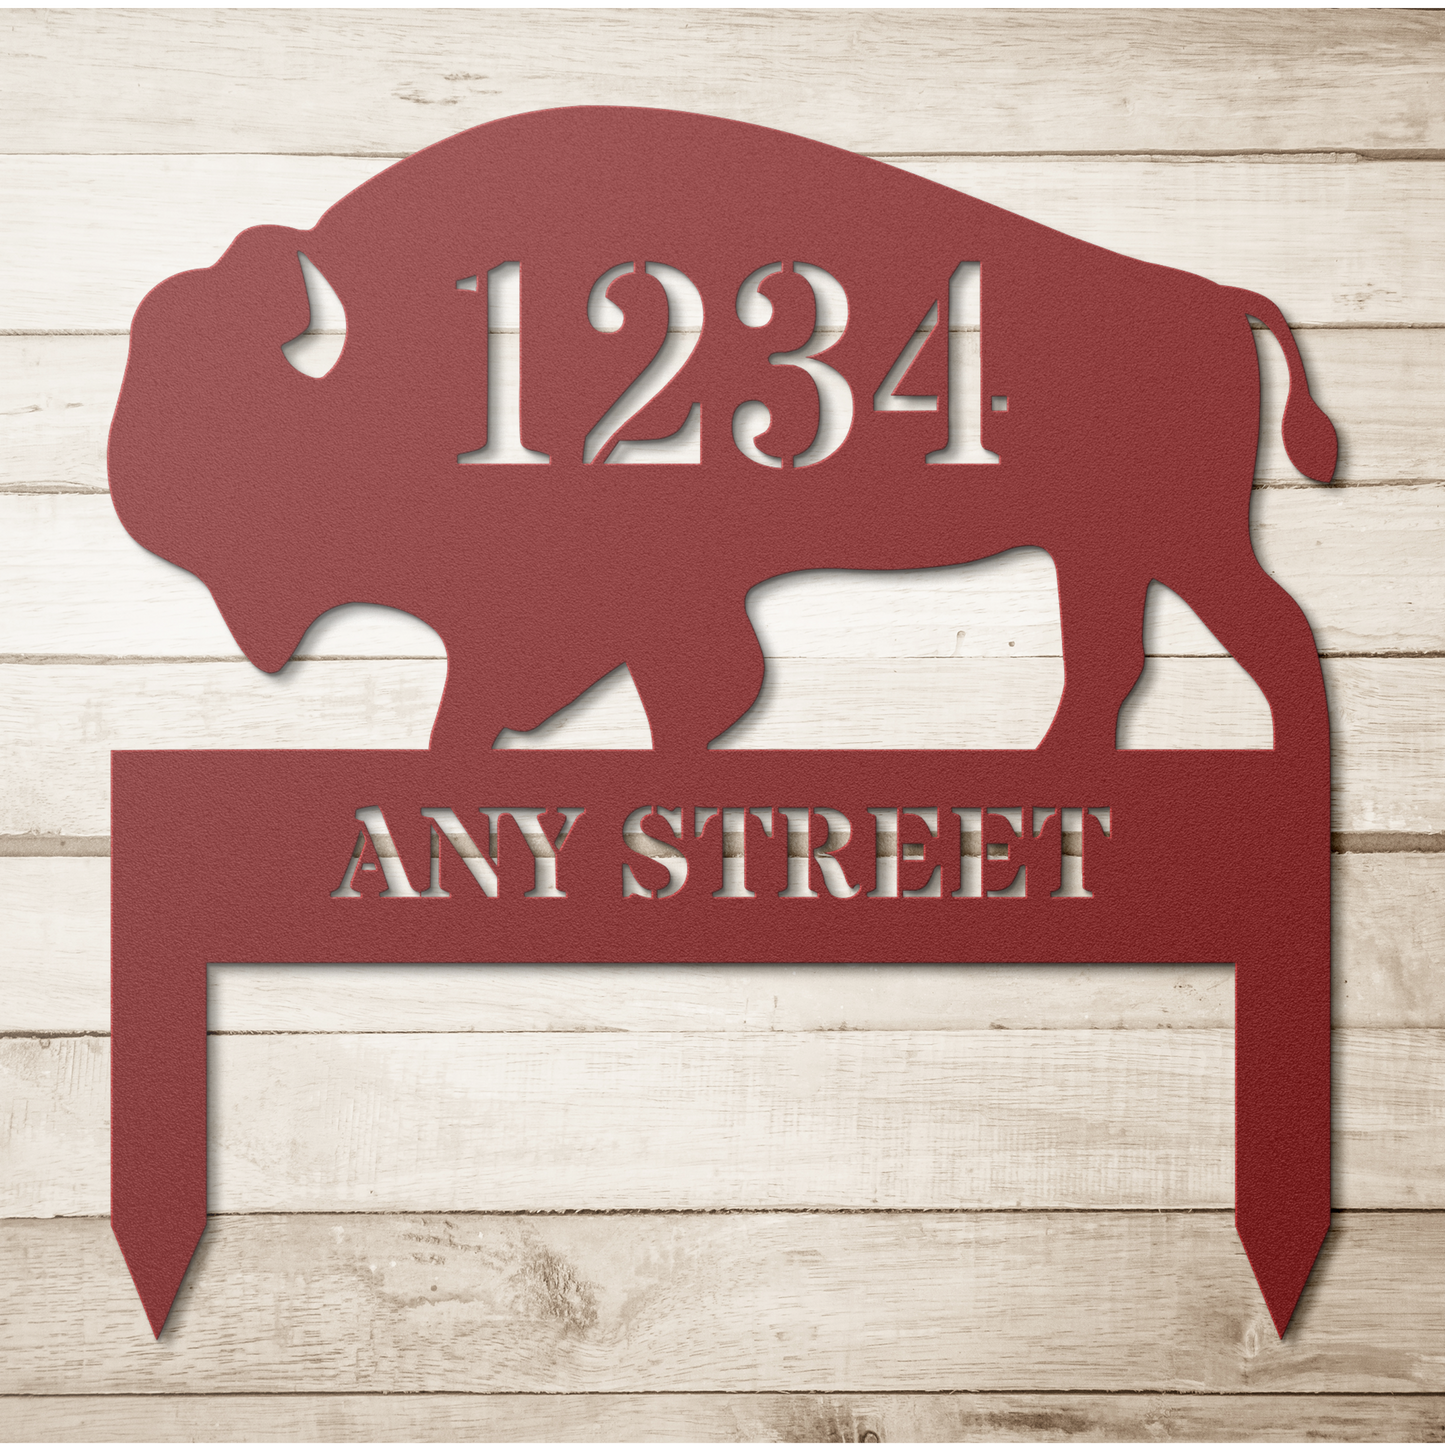 Personalized metal Buffalo address sign with stakes for lawn